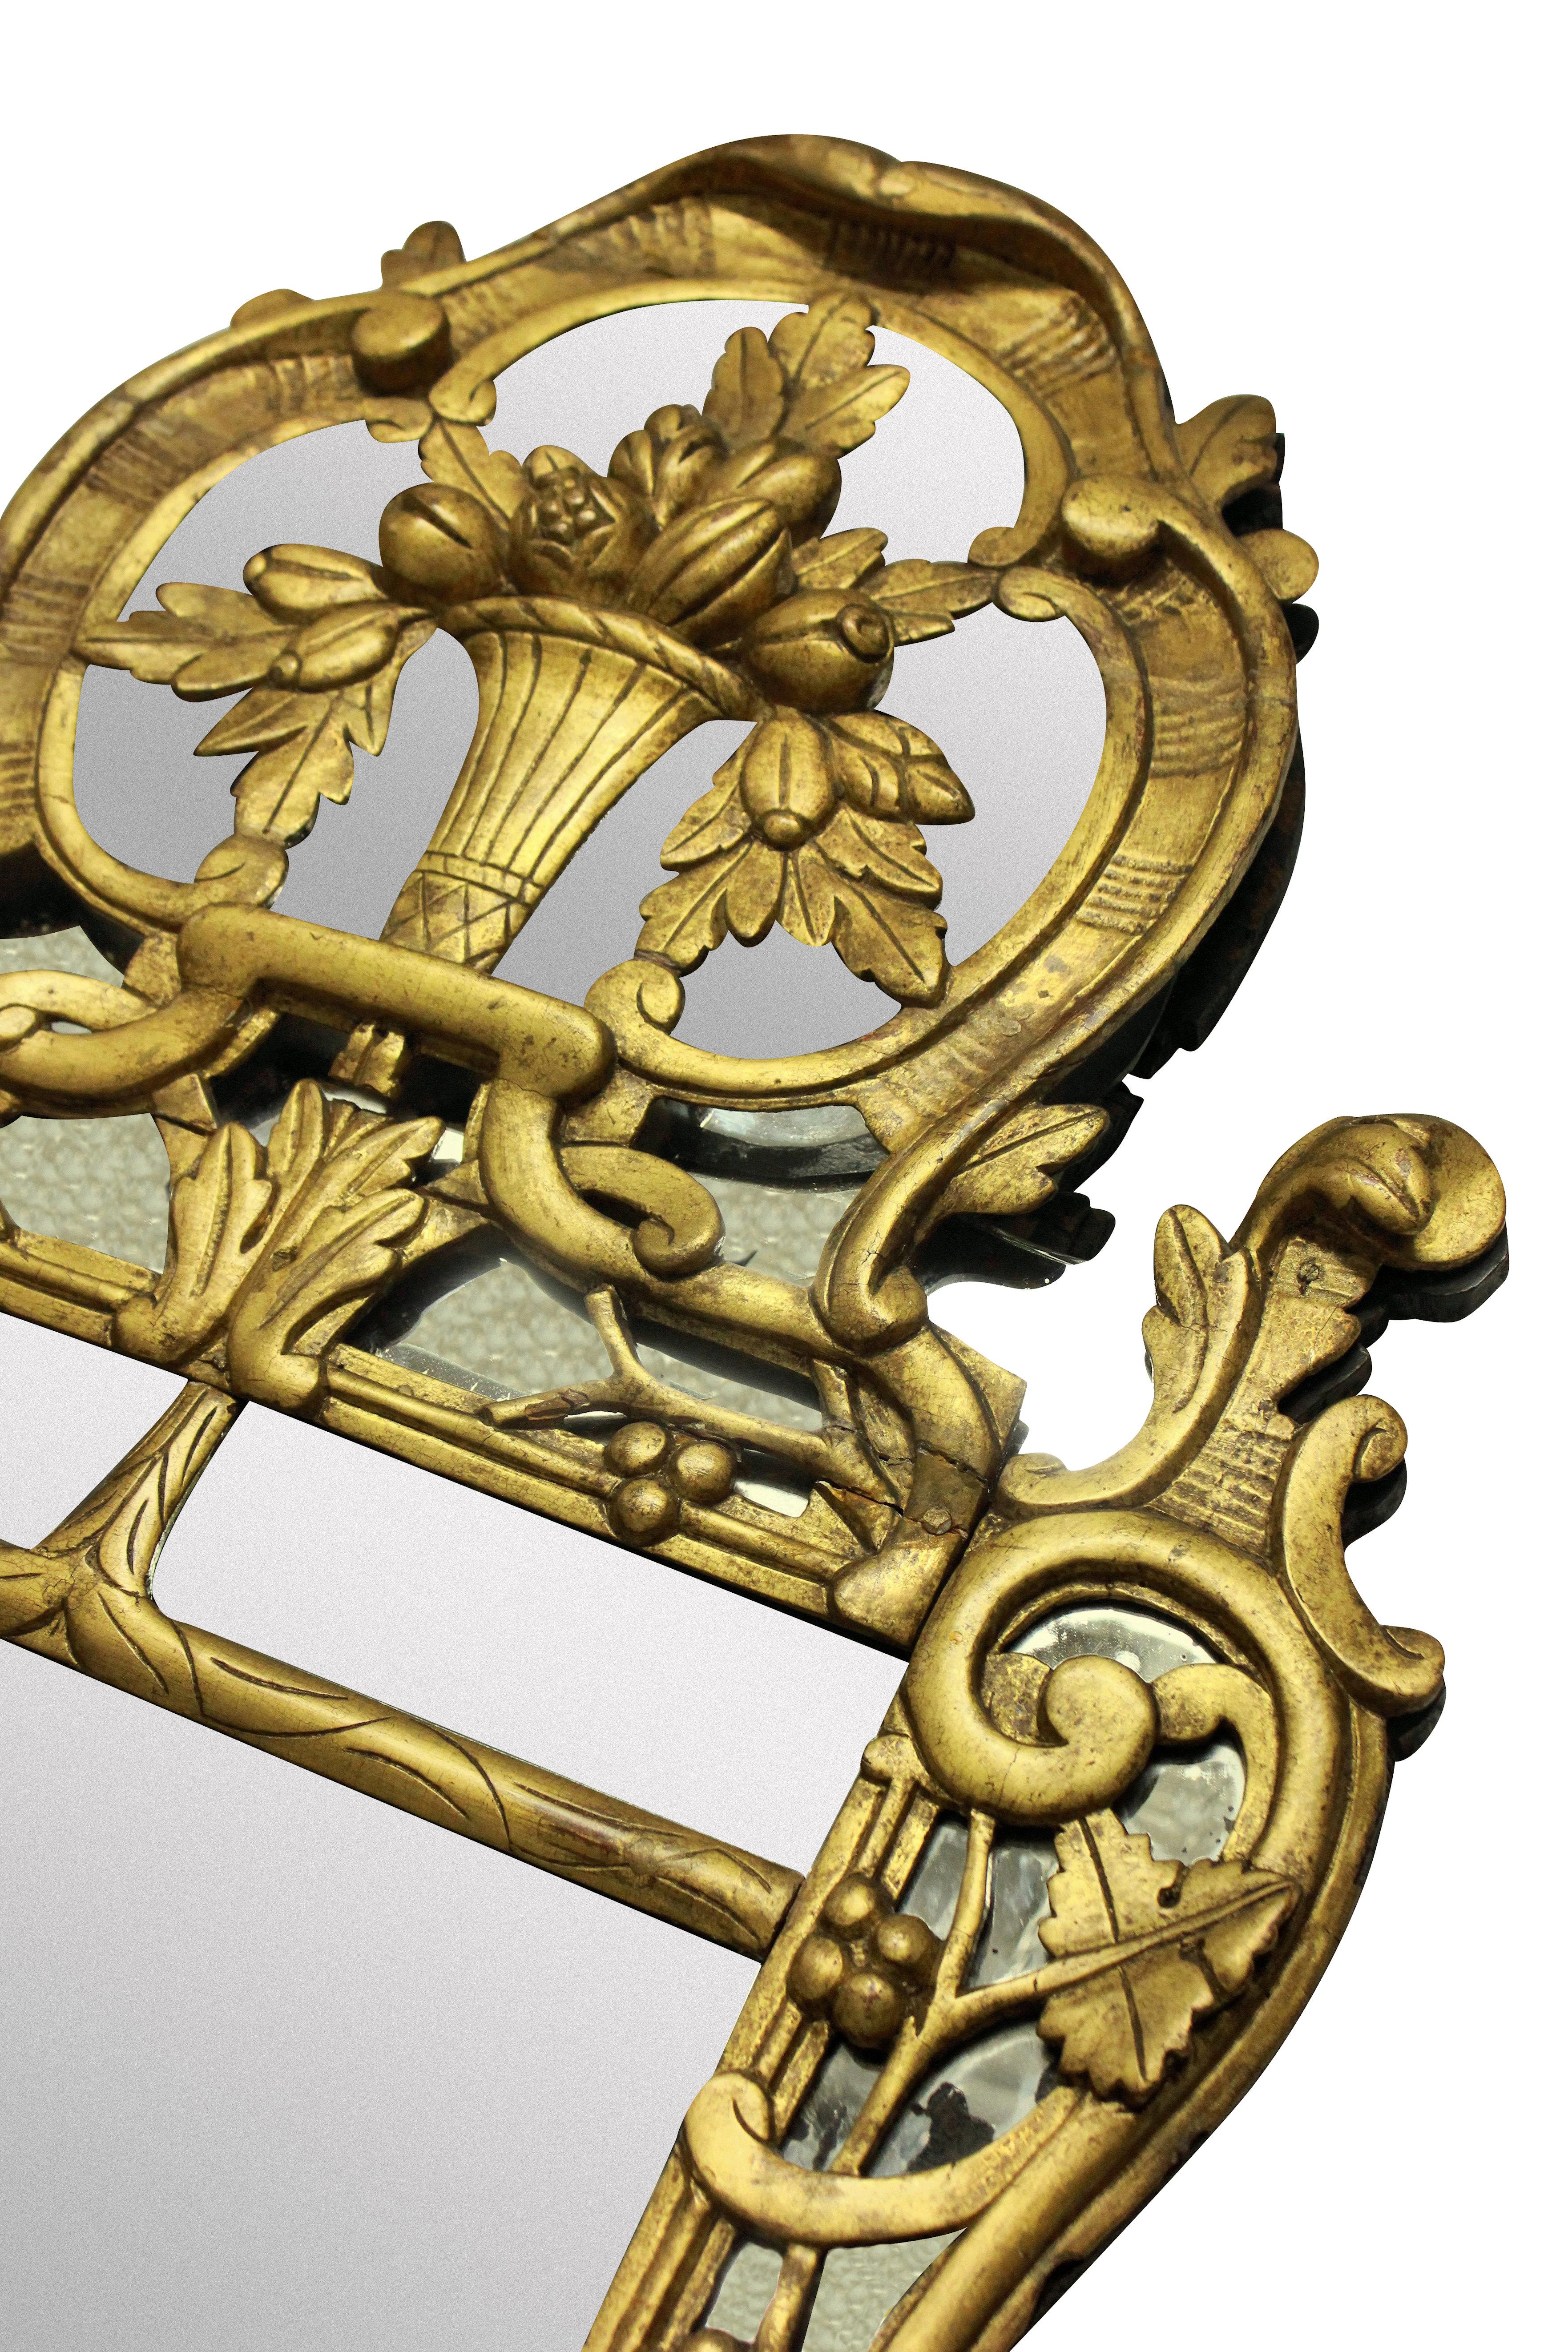 A French Louis XV mirror in carved giltwood, depicting foliage, with its original mercury plate. There is distressing around the edges but not in the middle of the mirror plate.

